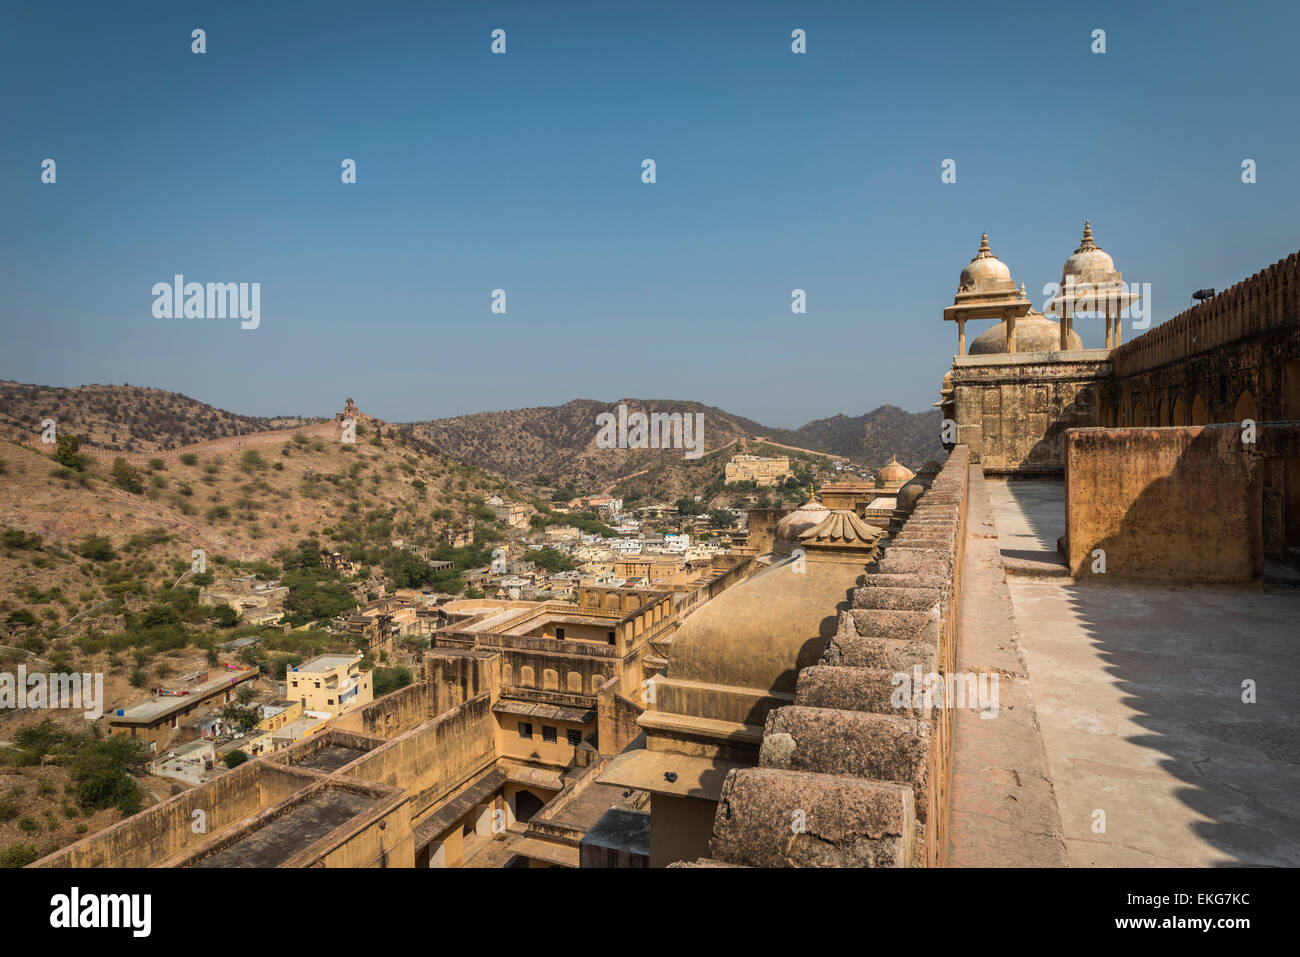 View from the battlements of Amber Fort near Jaipur, Rajasthan, India Stock Photo